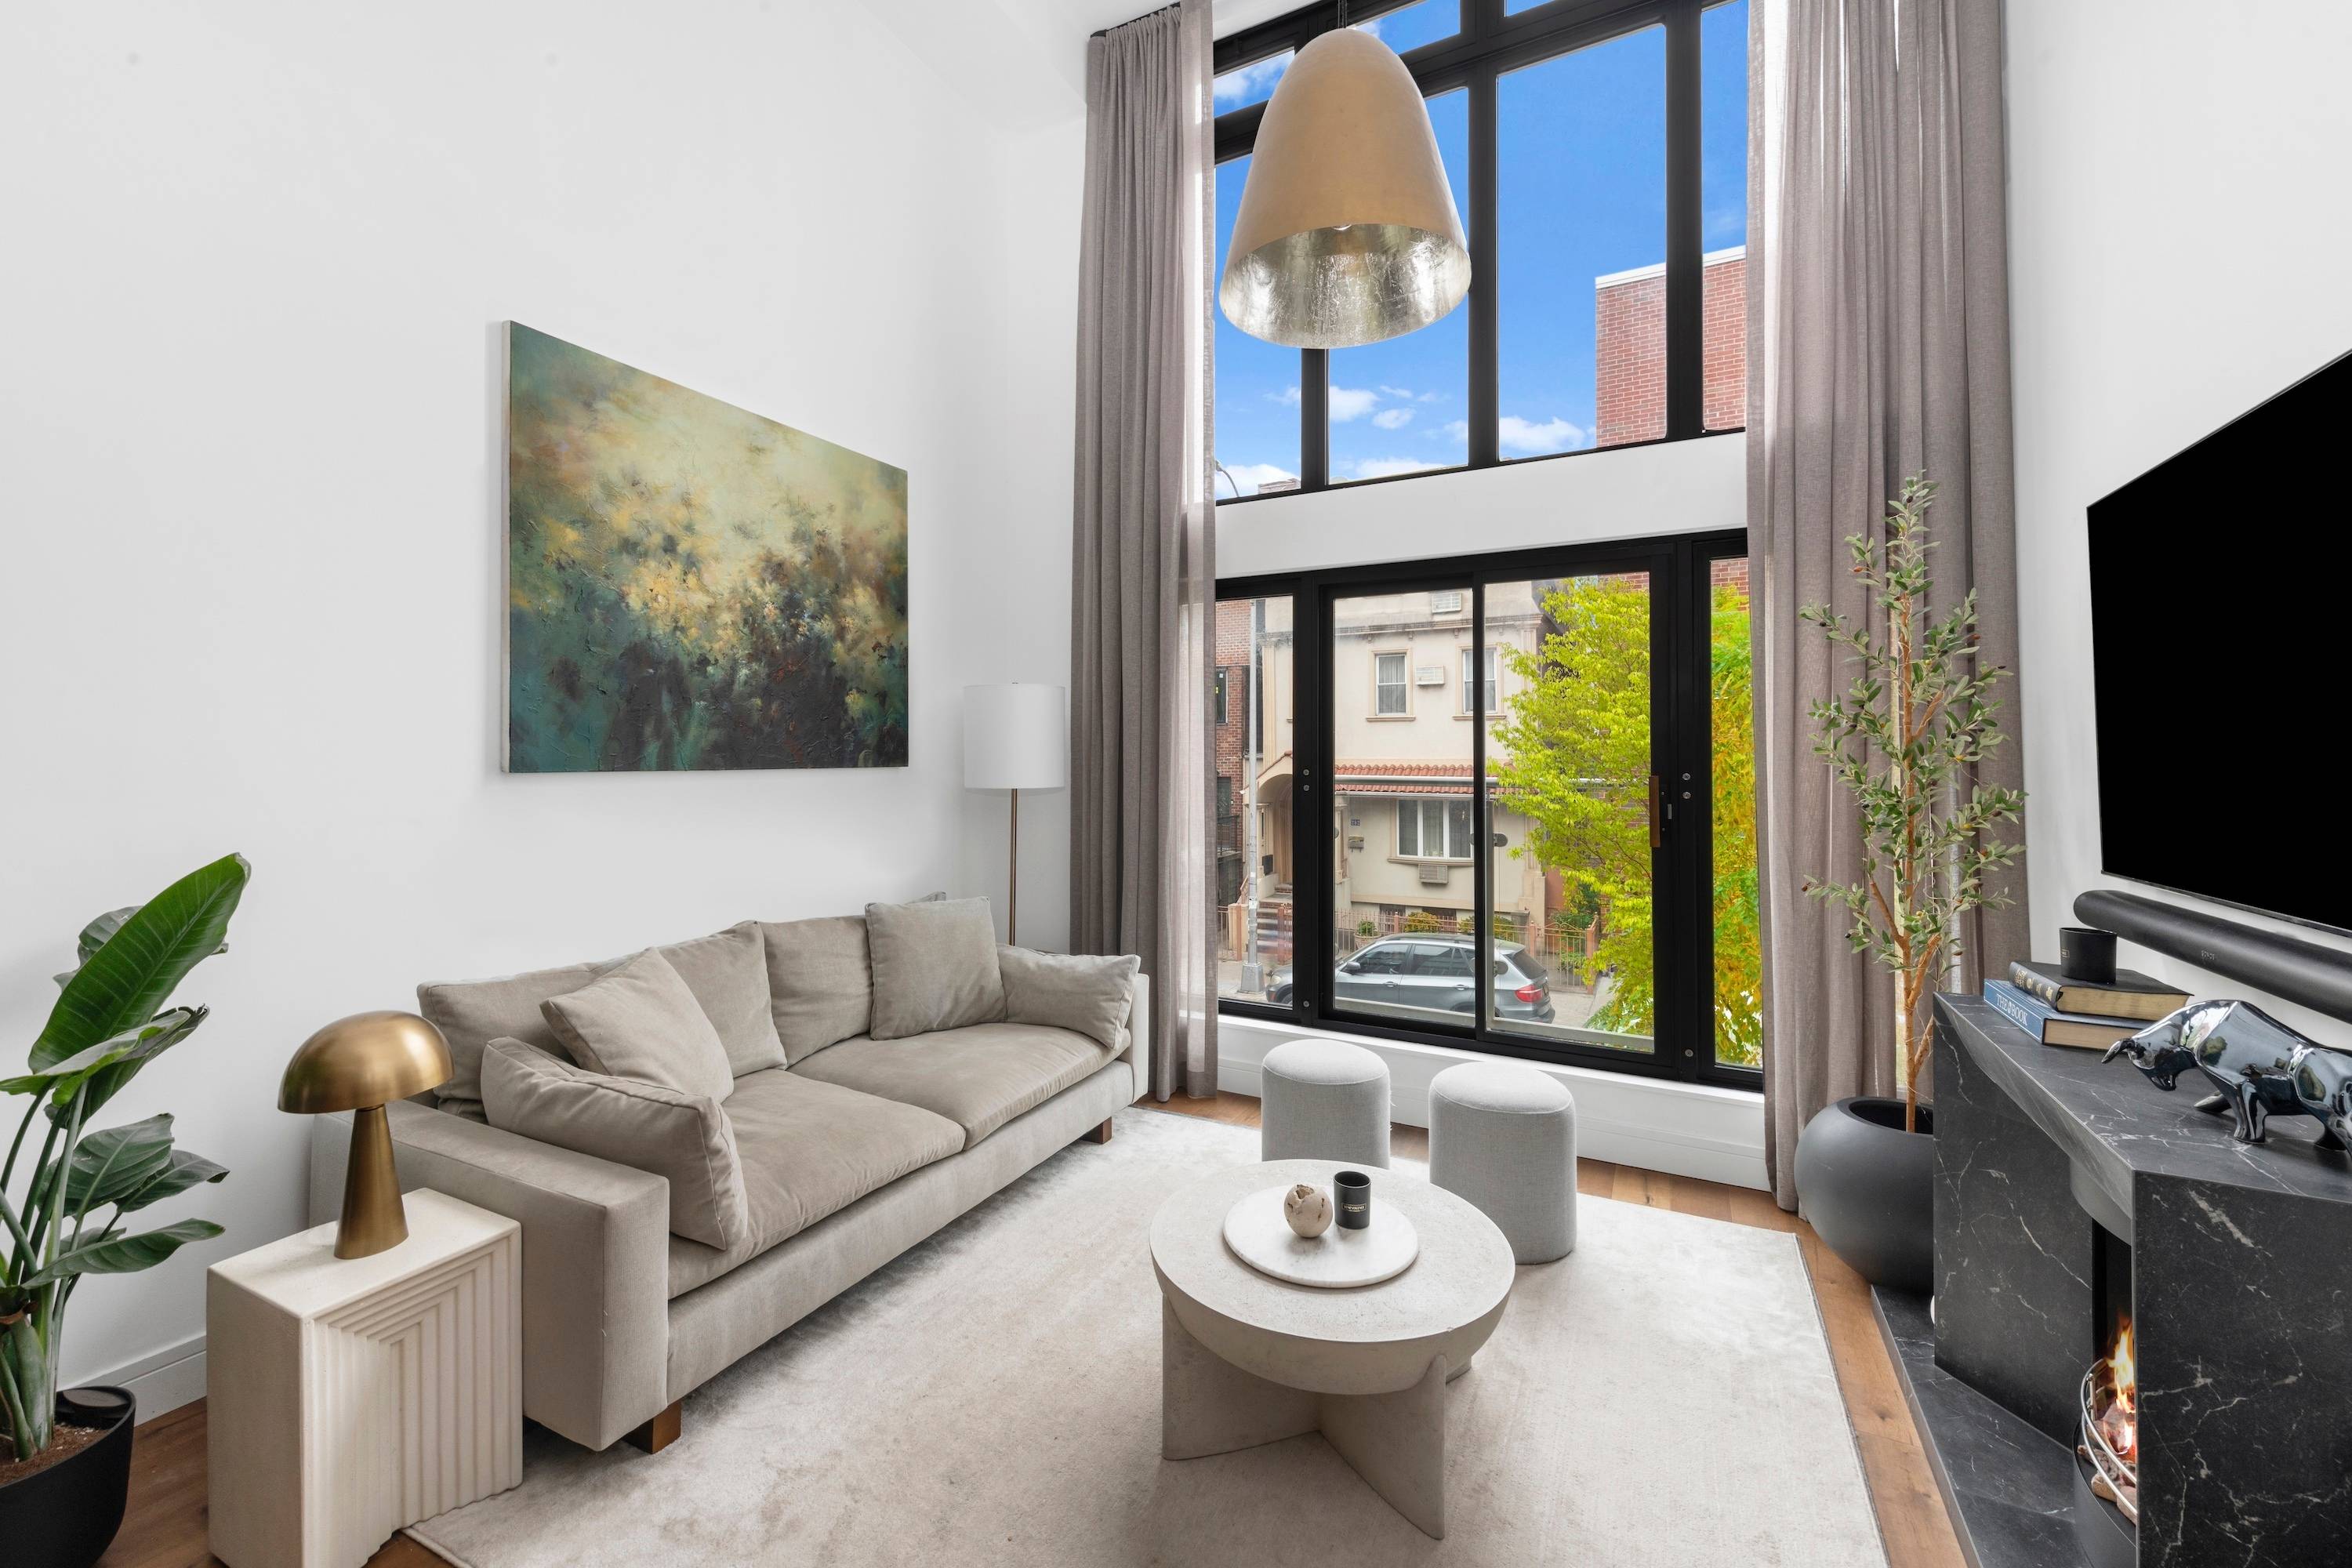 Welcome to Unit 2C at the Evry, a stunning east facing duplex in the heart of Williamsburg.